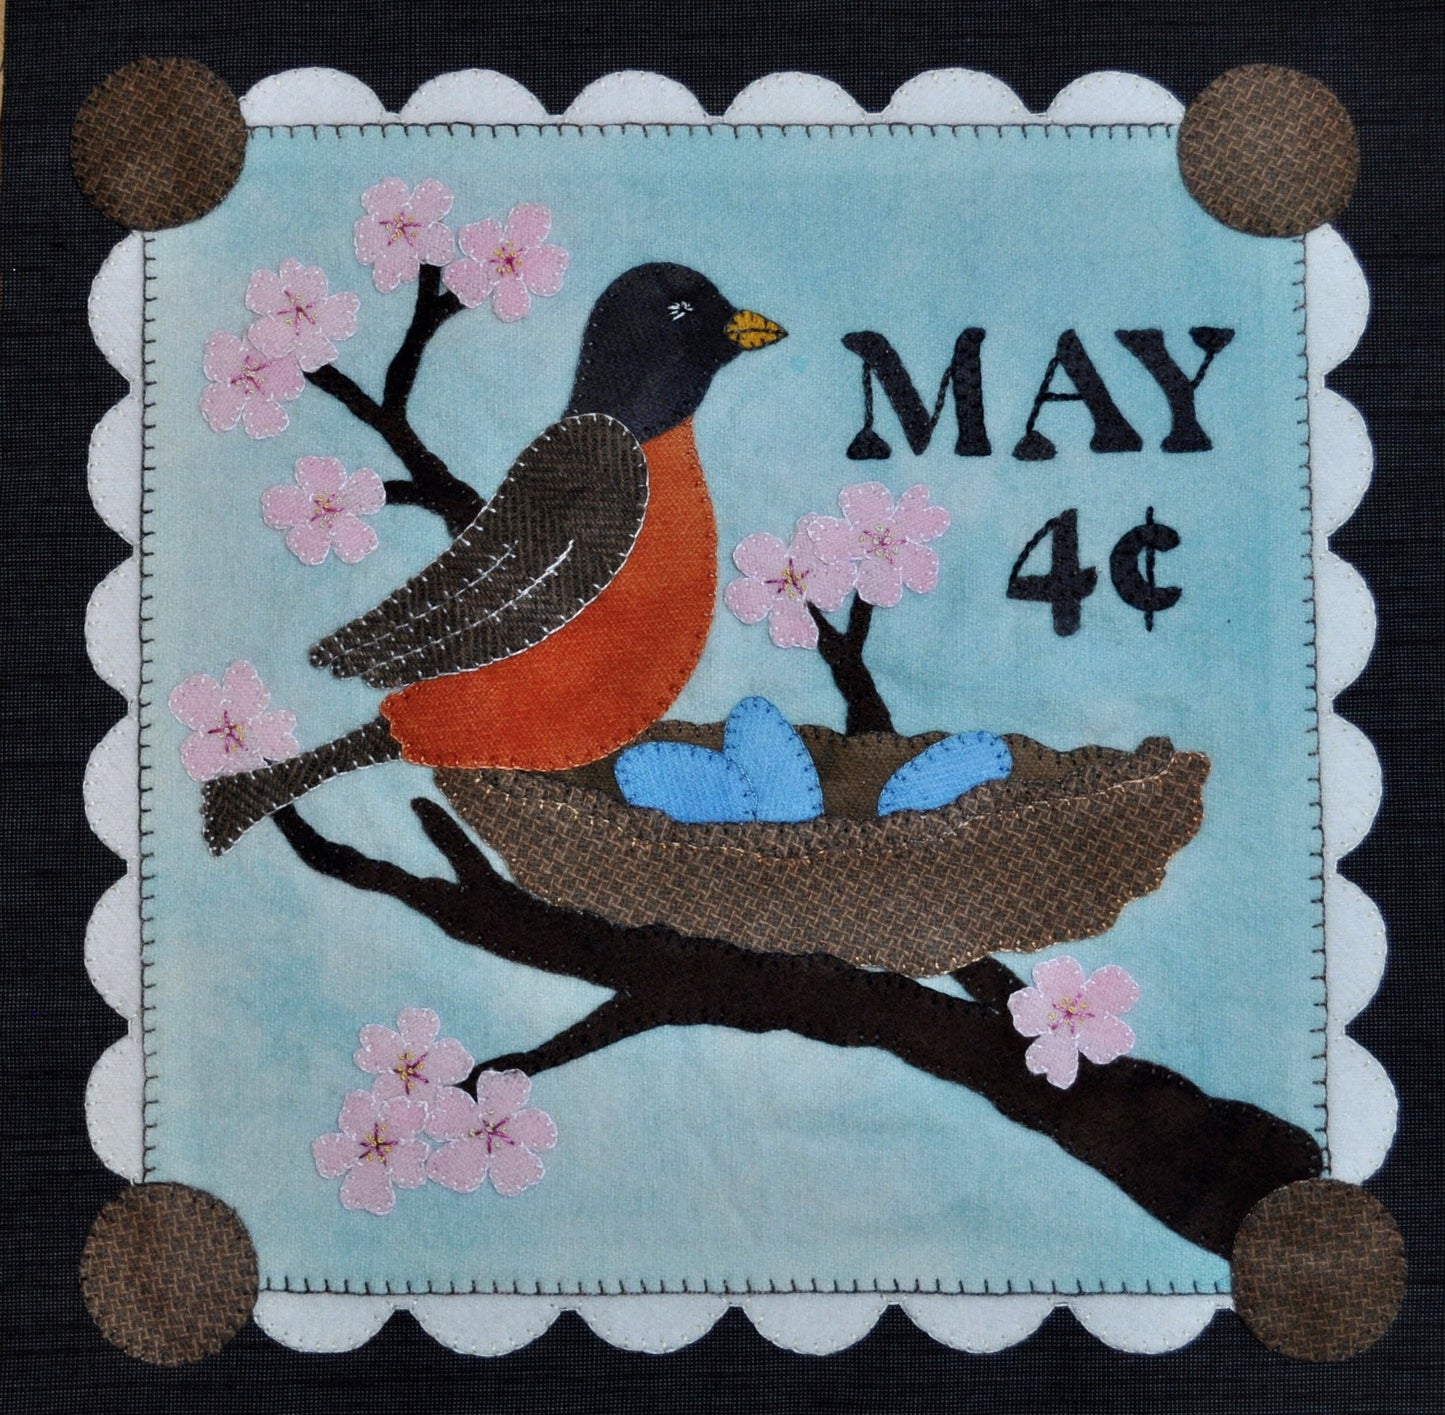 Thread Kit #112 - Signs of Spring